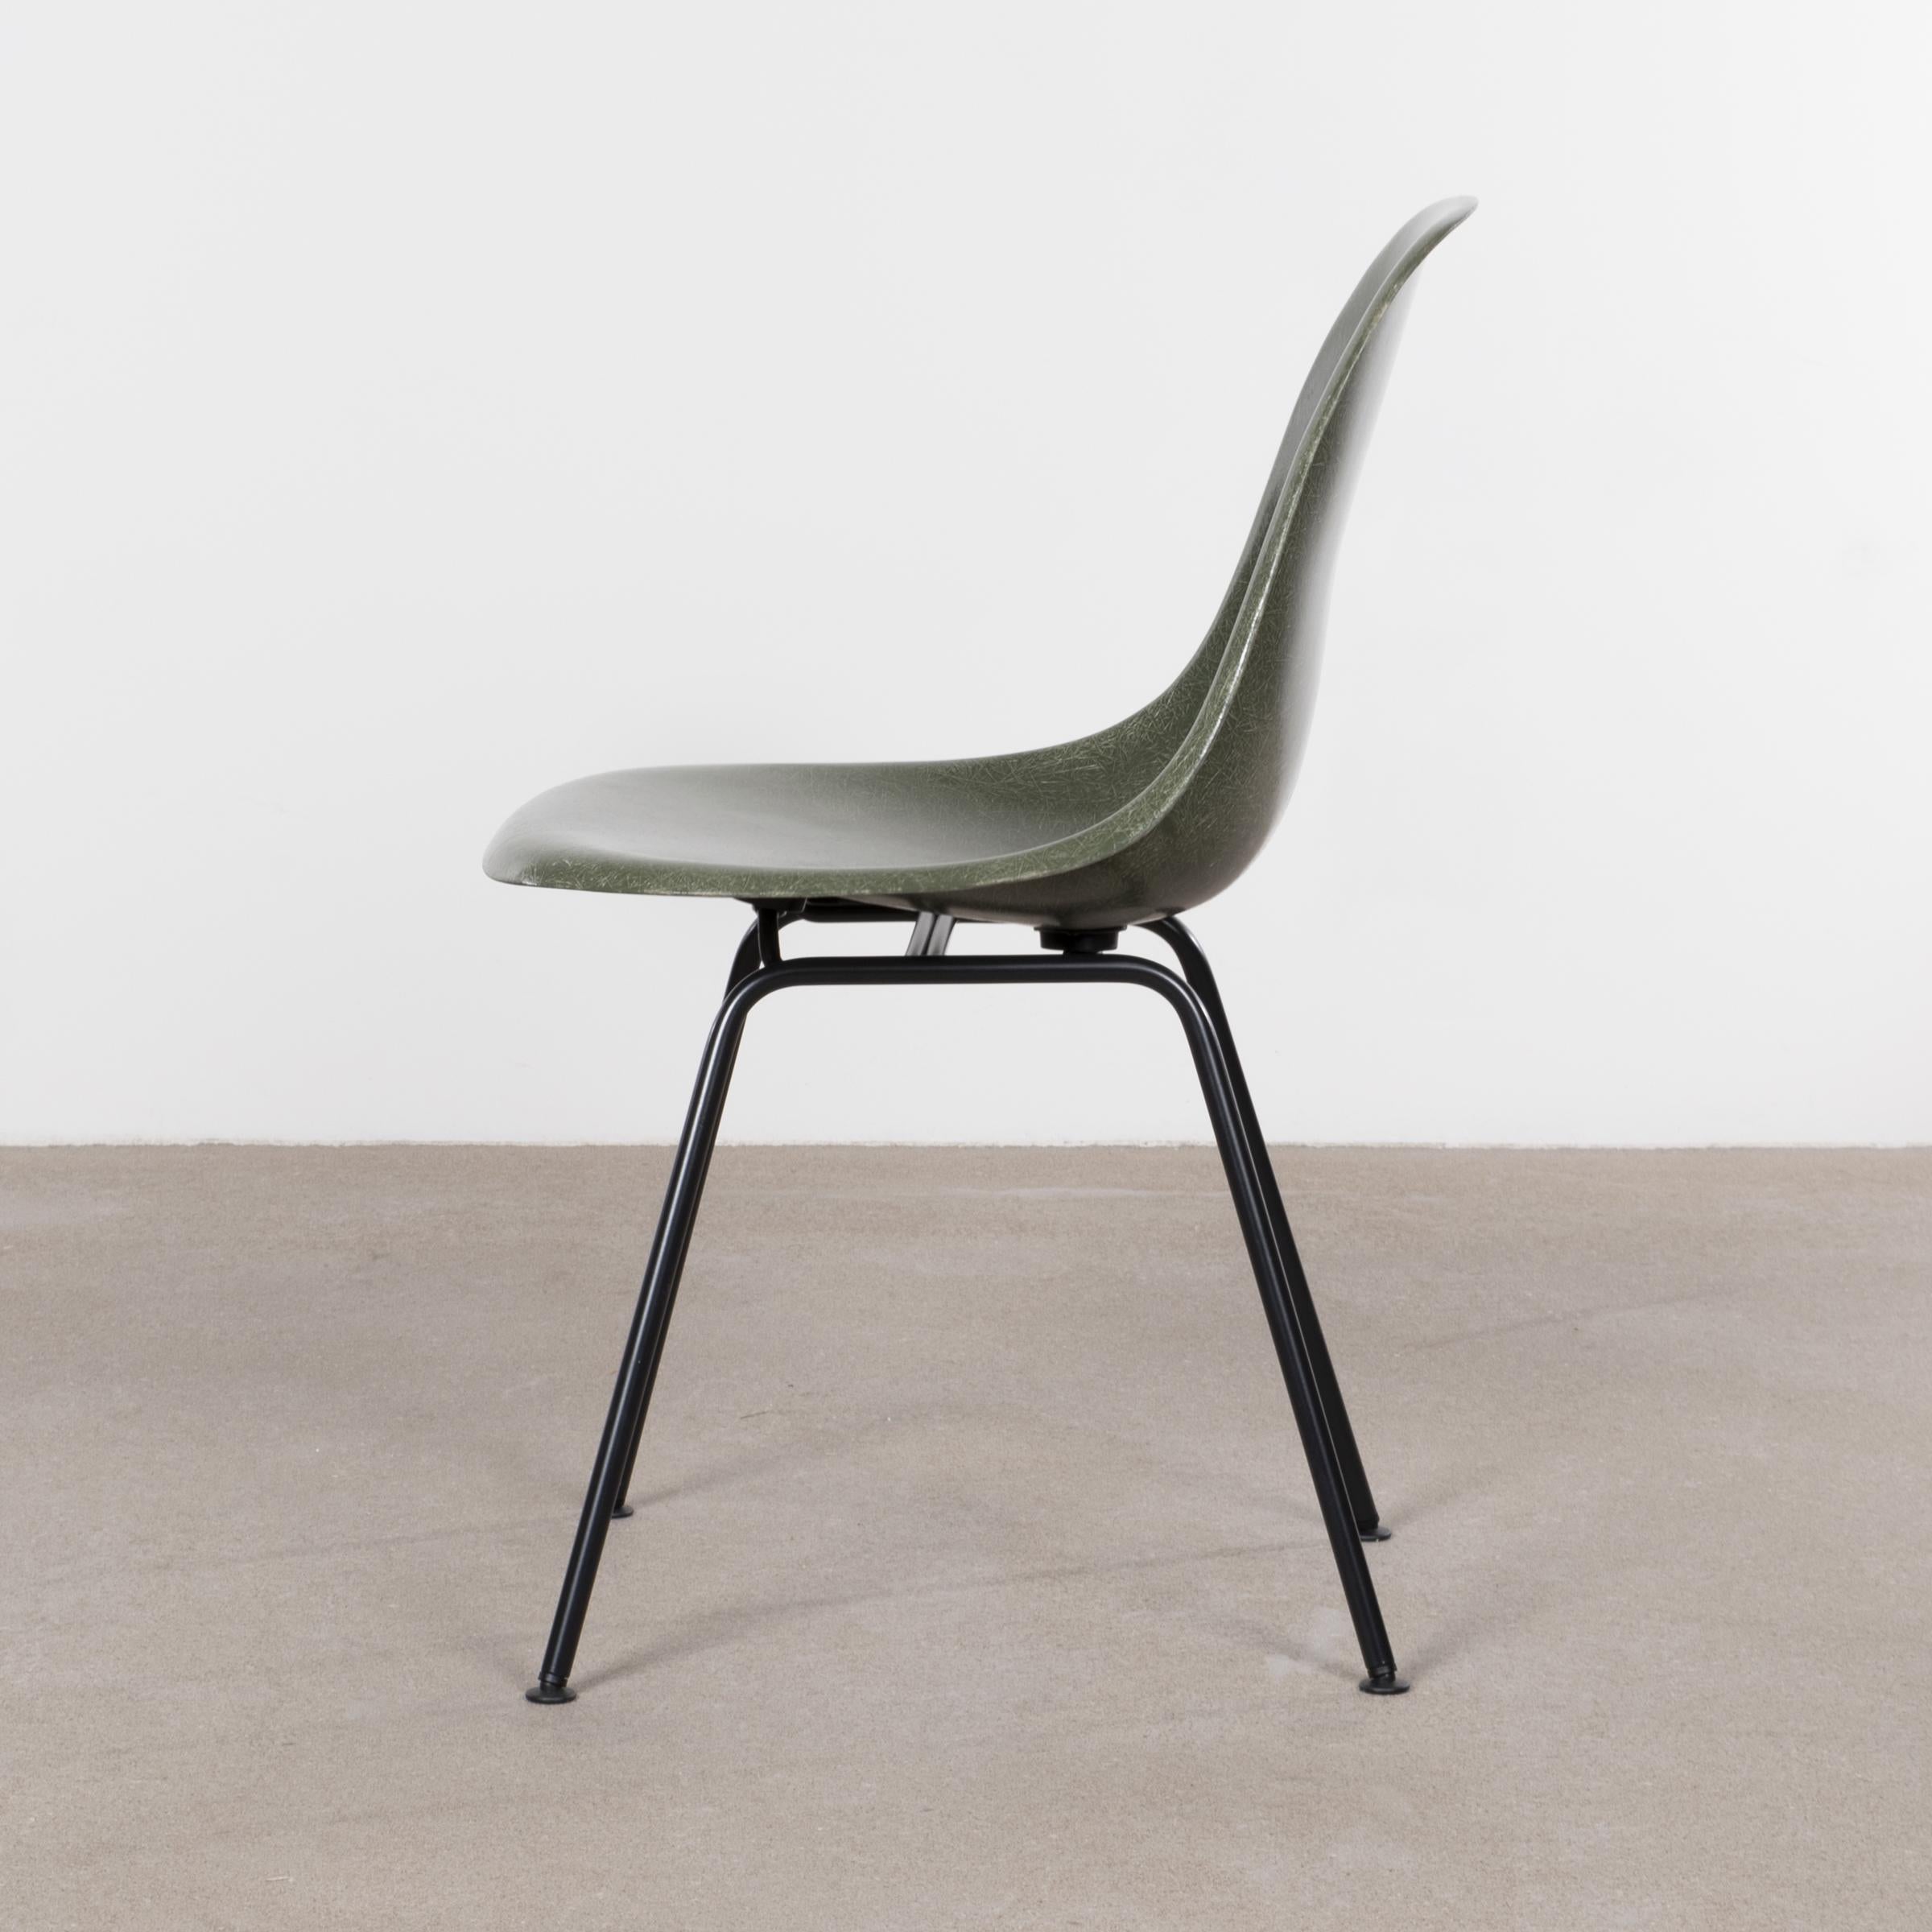 Beautiful iconic DSX chair in the color: Olive green dark. The side shell chair is in very good condition with only slight traces of use. Replaced shock mounts which guarantee save usability for the next decades. Basic dark powder coated or zinc